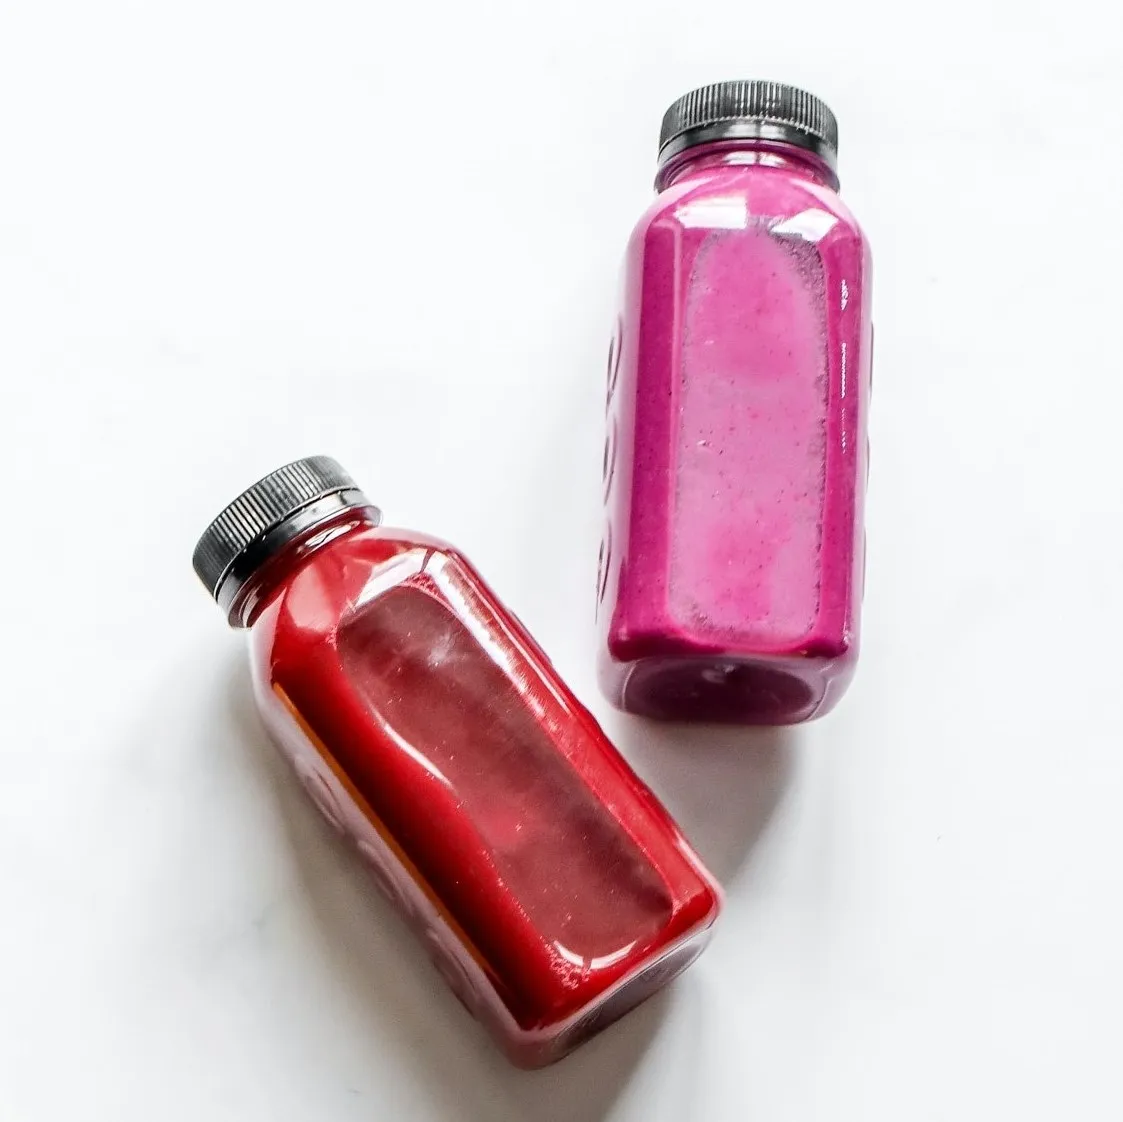 Two unlabelled bottles with pink content lying on white surface